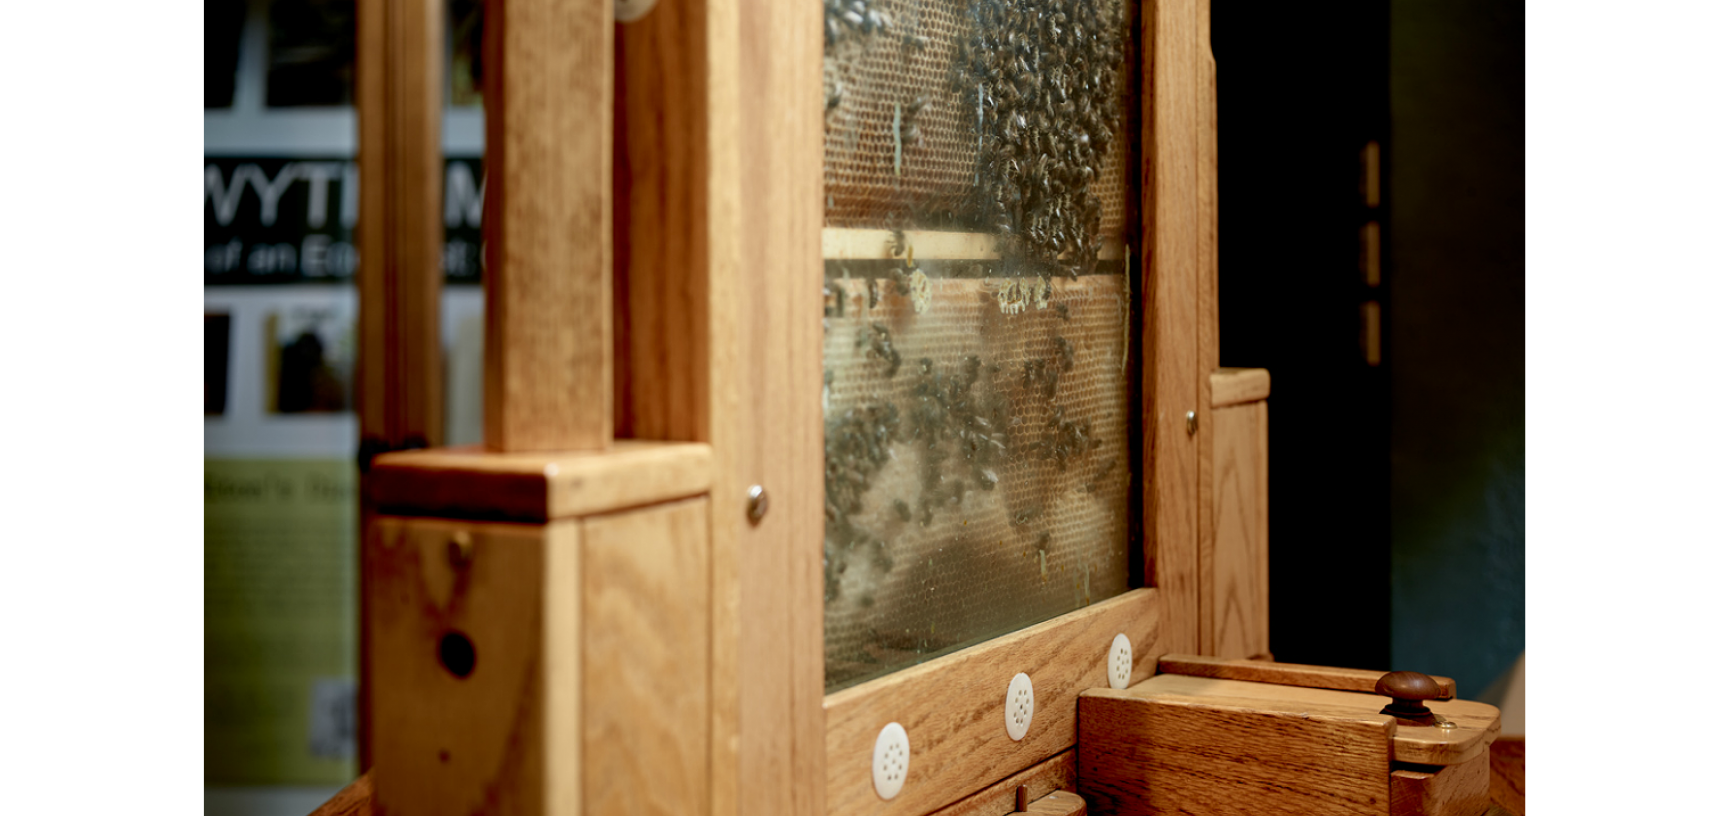 A side view of our hive, showing where the bees are fed from during the winter months